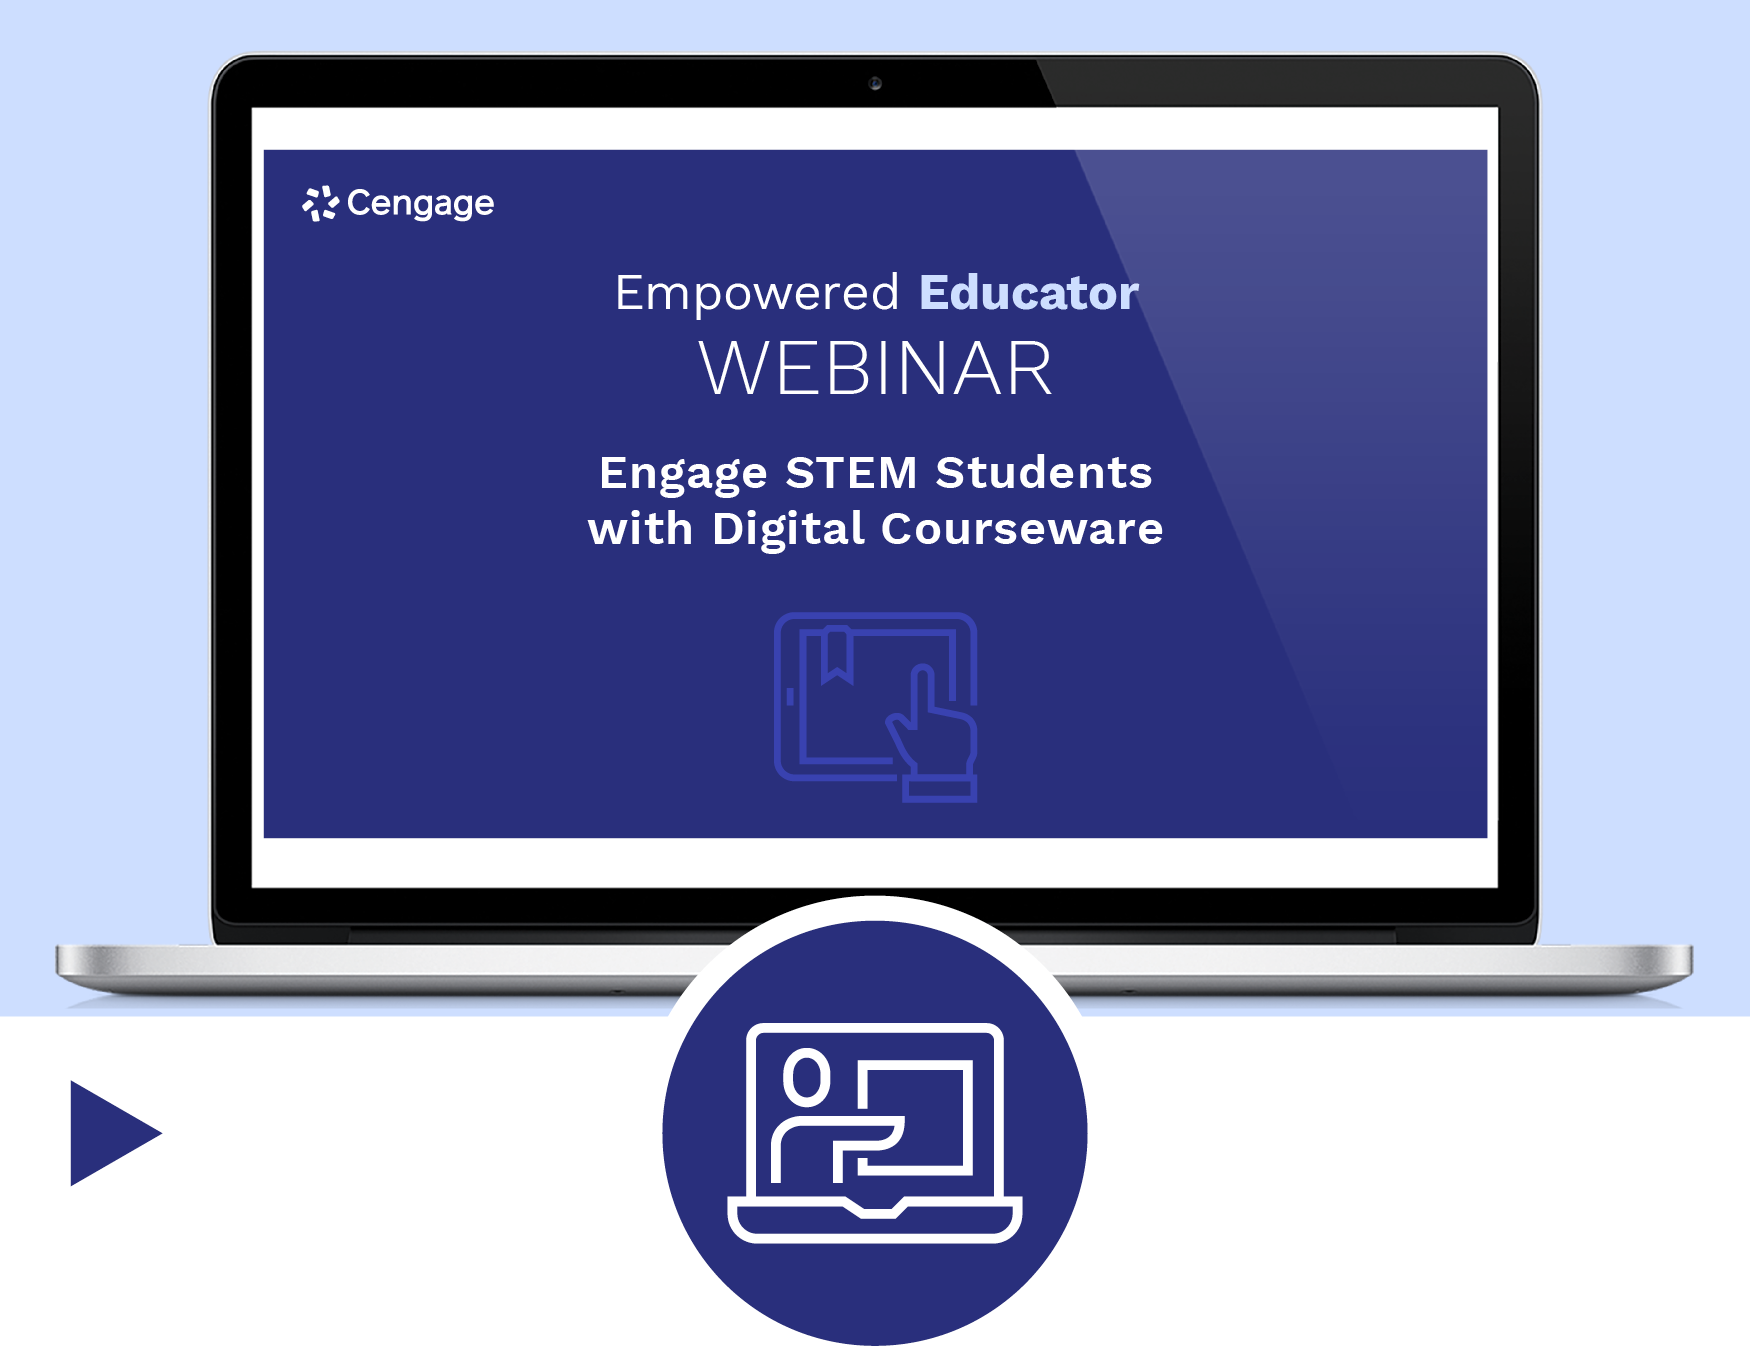 Engage STEM Students with Digital Courseware